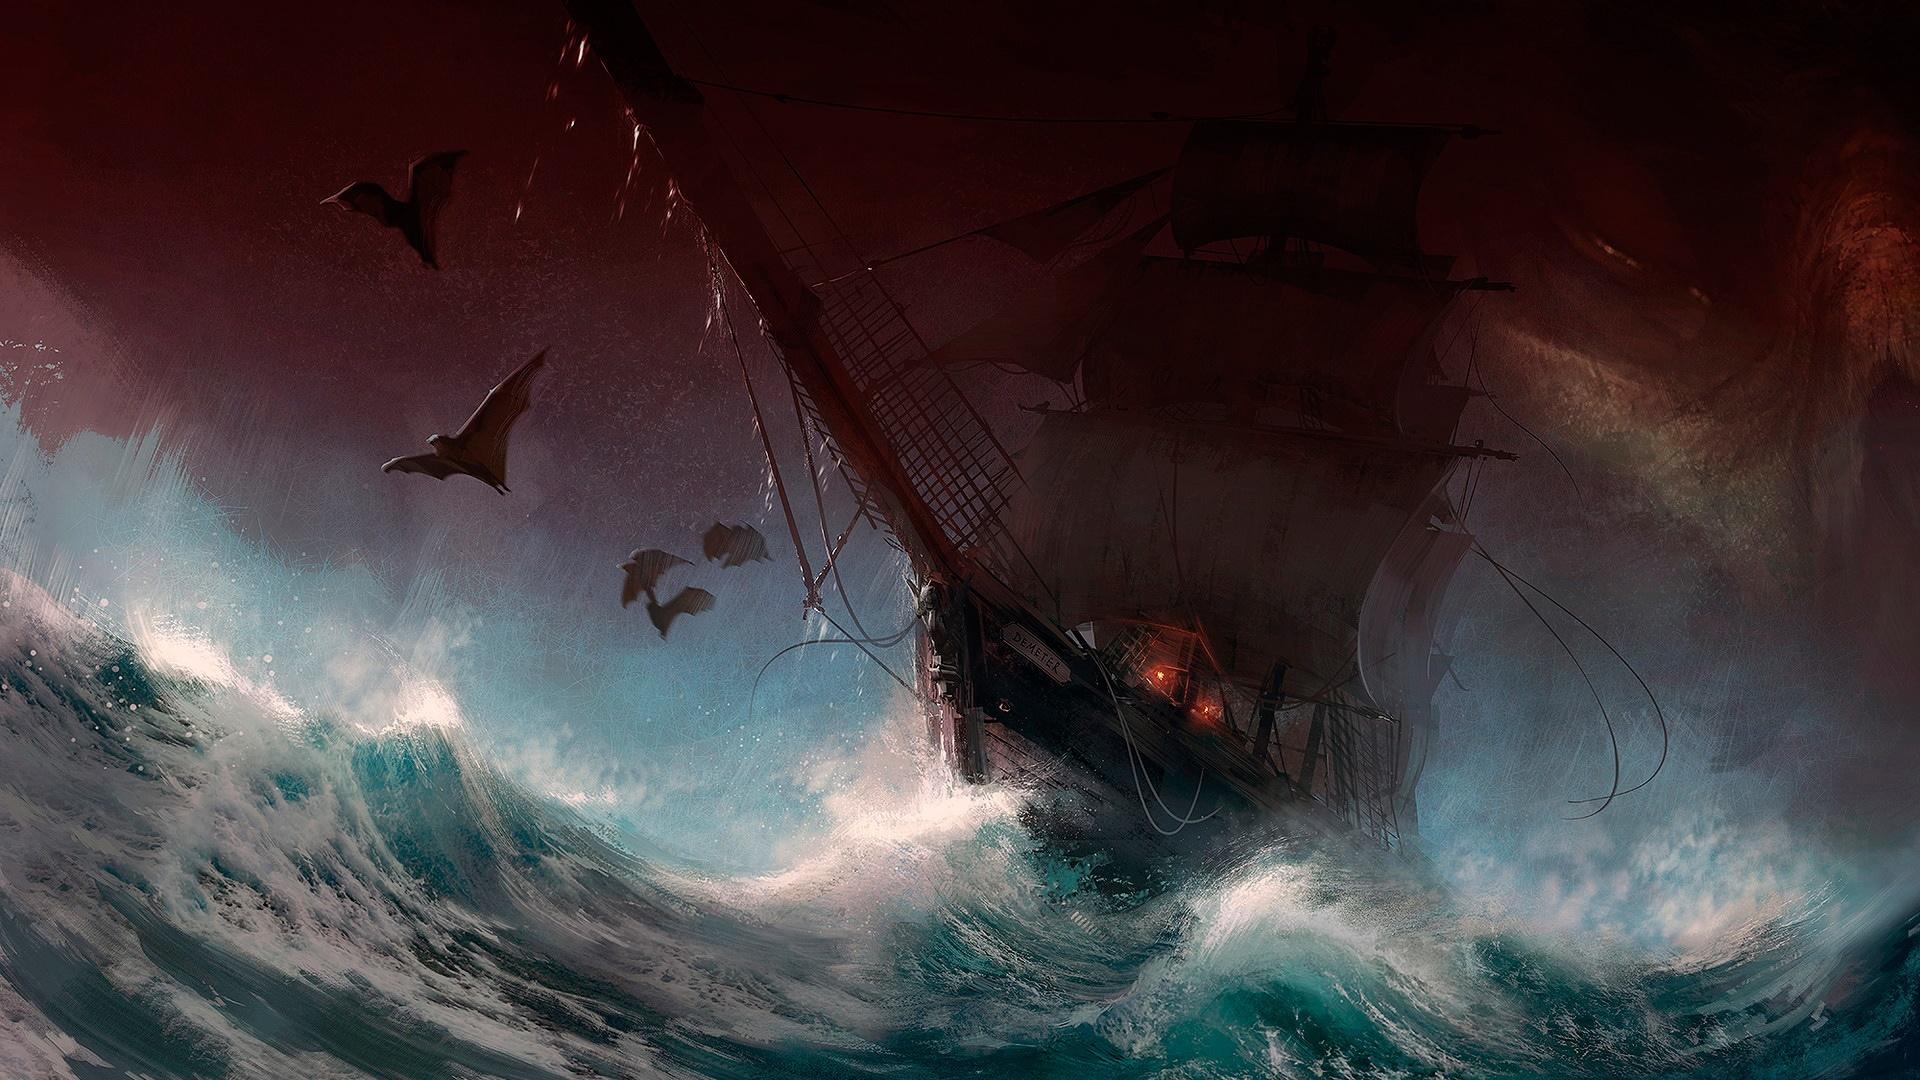 Sailing Ship On The Stormy Sea HD Wallpaper Ultra